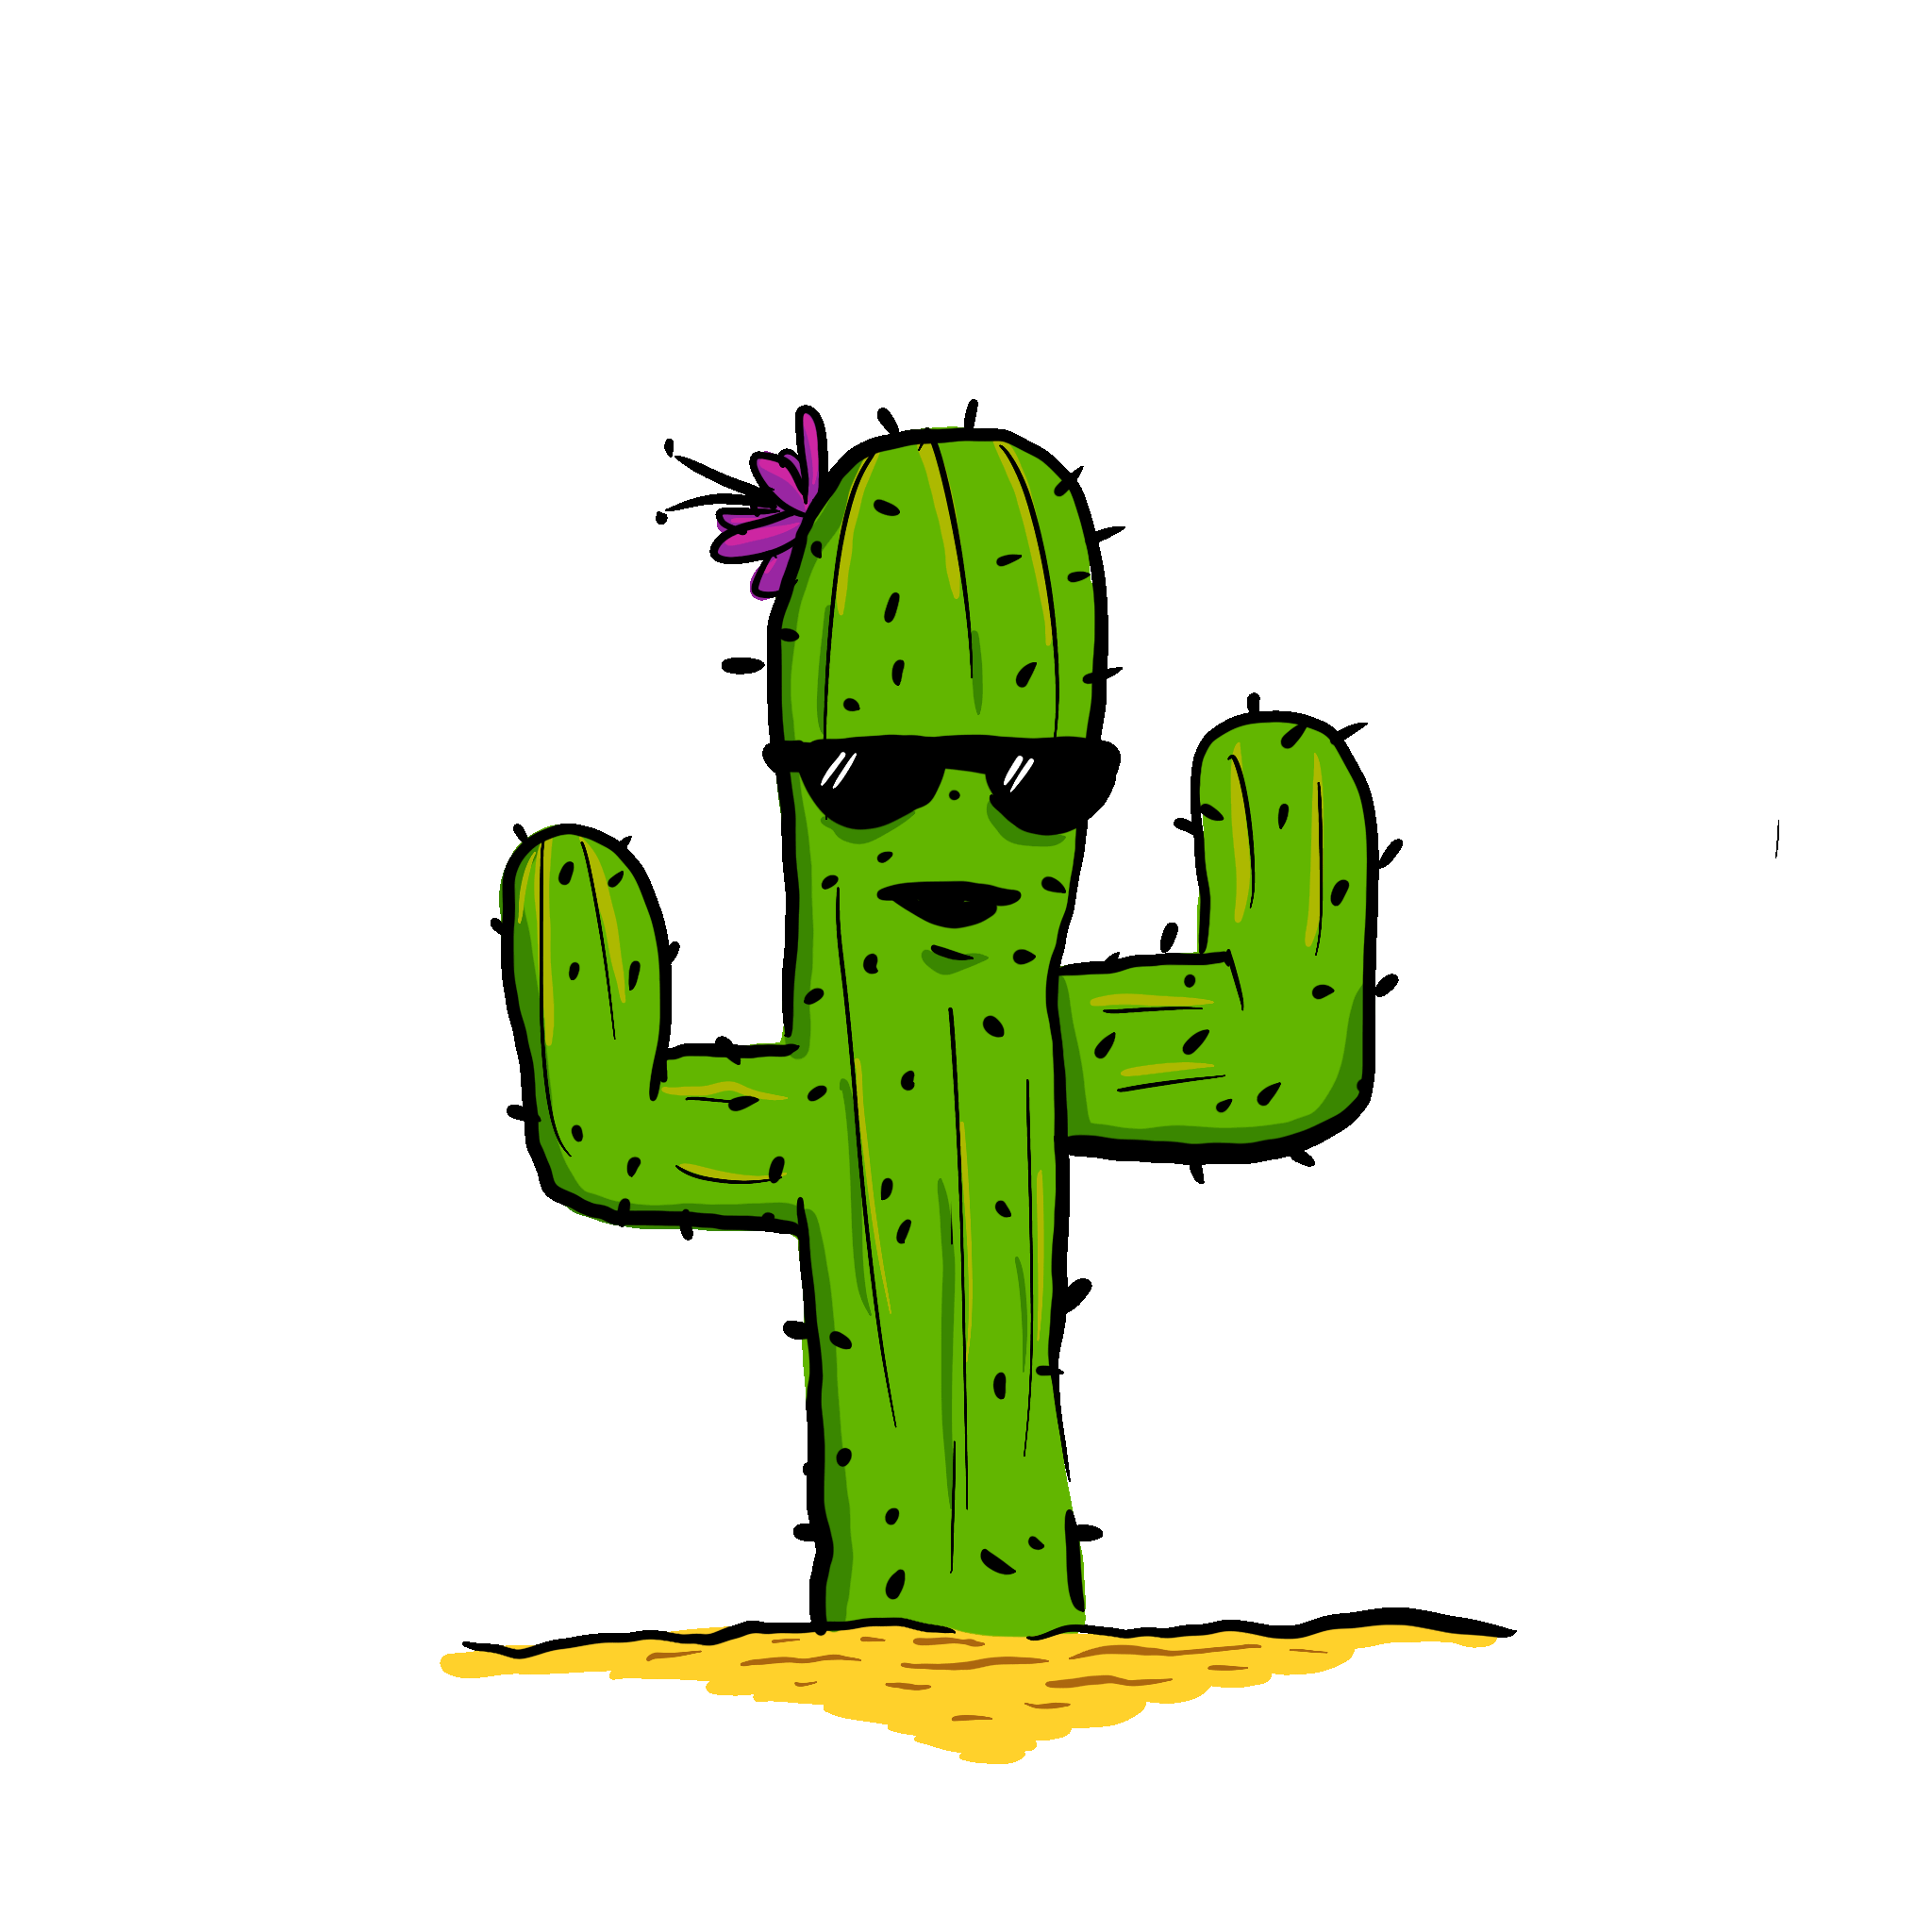 Cactus Dancing Sticker by Stephen Petronis for iOS & Android | GIPHY